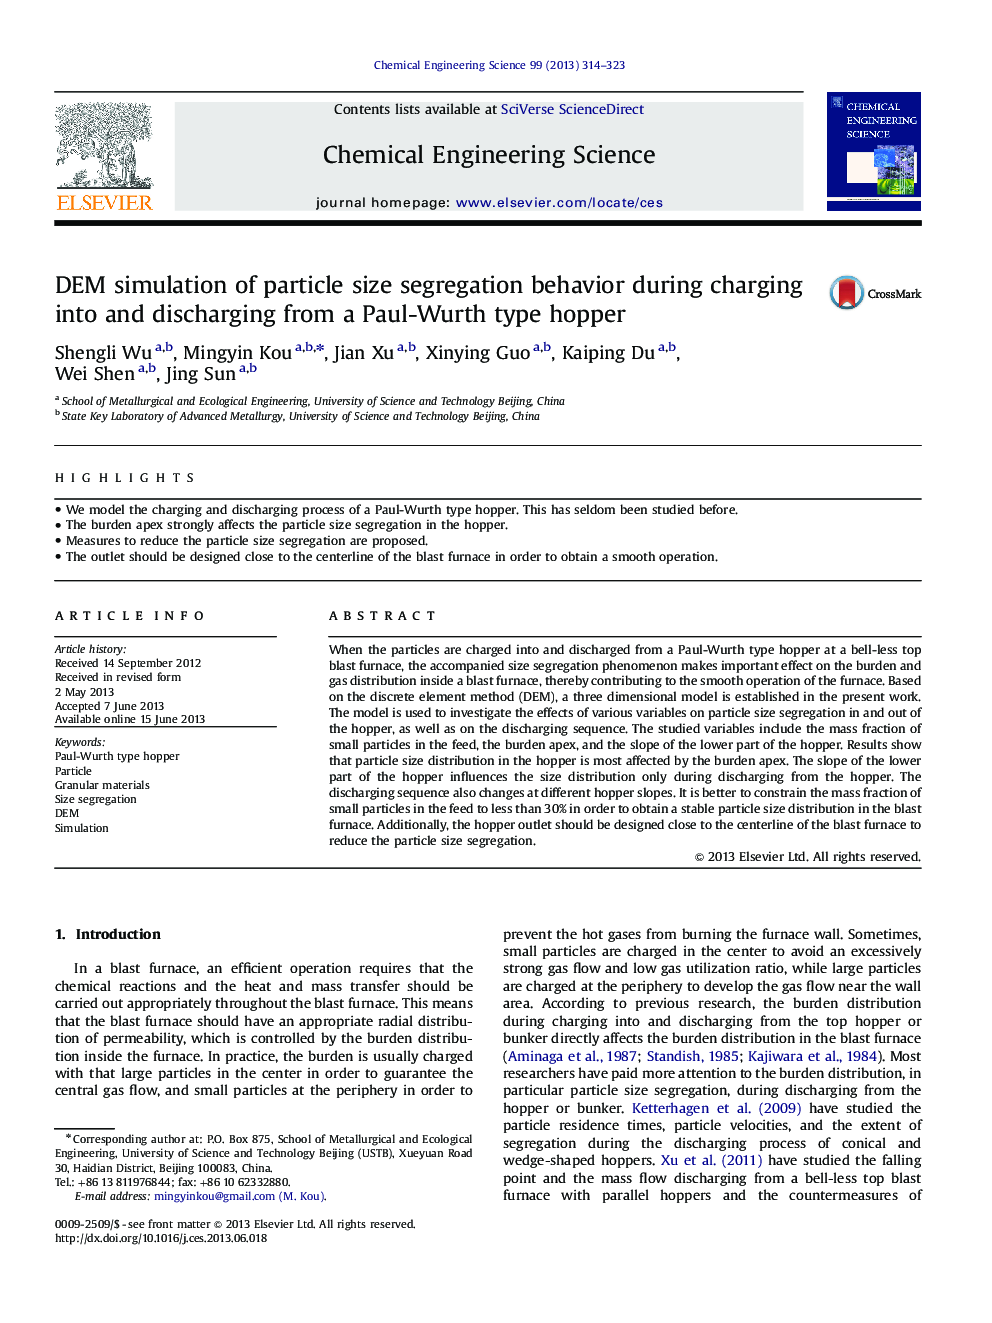 DEM simulation of particle size segregation behavior during charging into and discharging from a Paul-Wurth type hopper